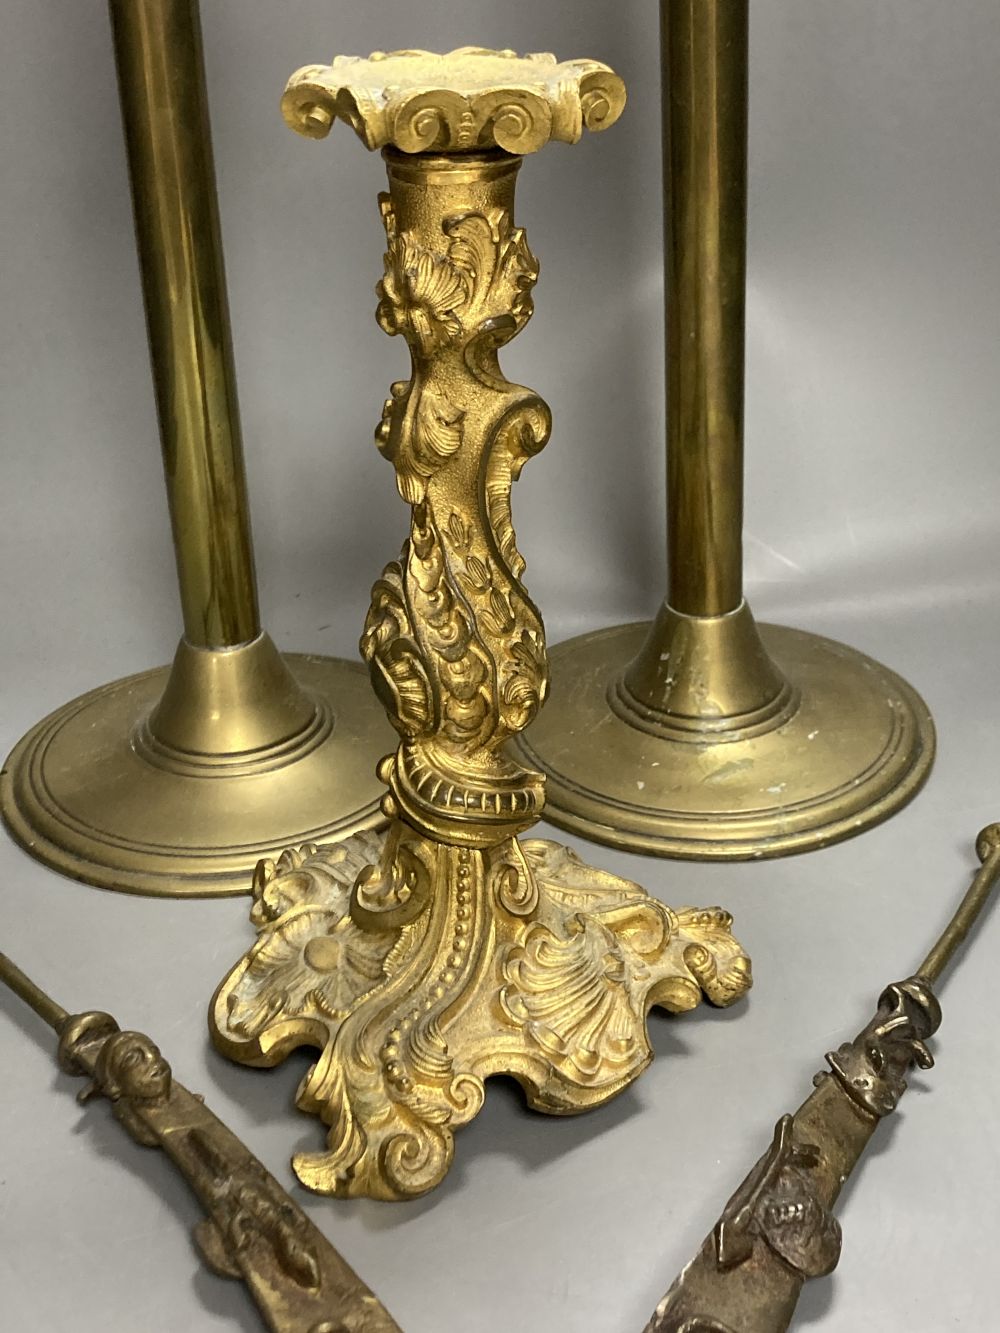 An 18th century French ormolu candlestick, 25cm, a pair of 19th century tubular brass ejector candlesticks, 46cm and two Chinese brass